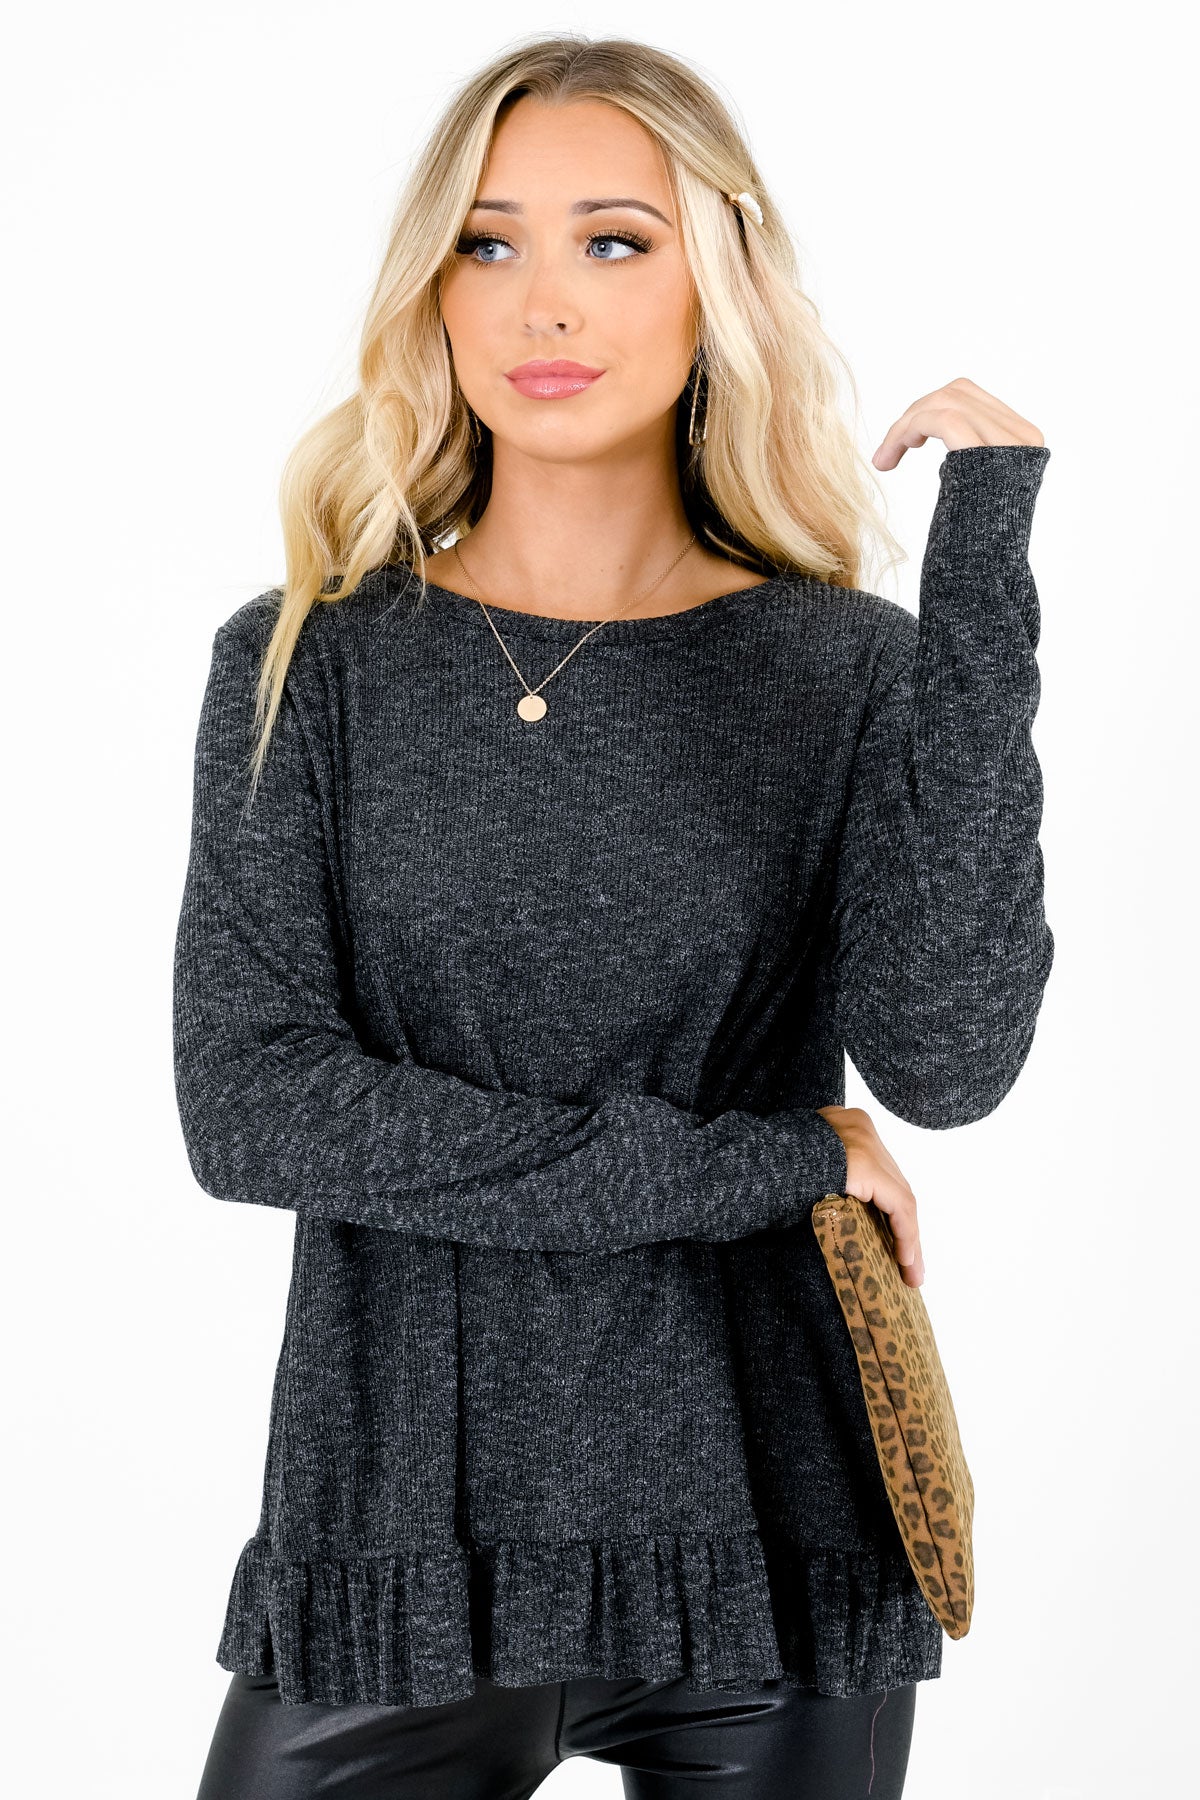 Women’s Charcoal Gray Relaxed Flowy Fit Boutique Tops